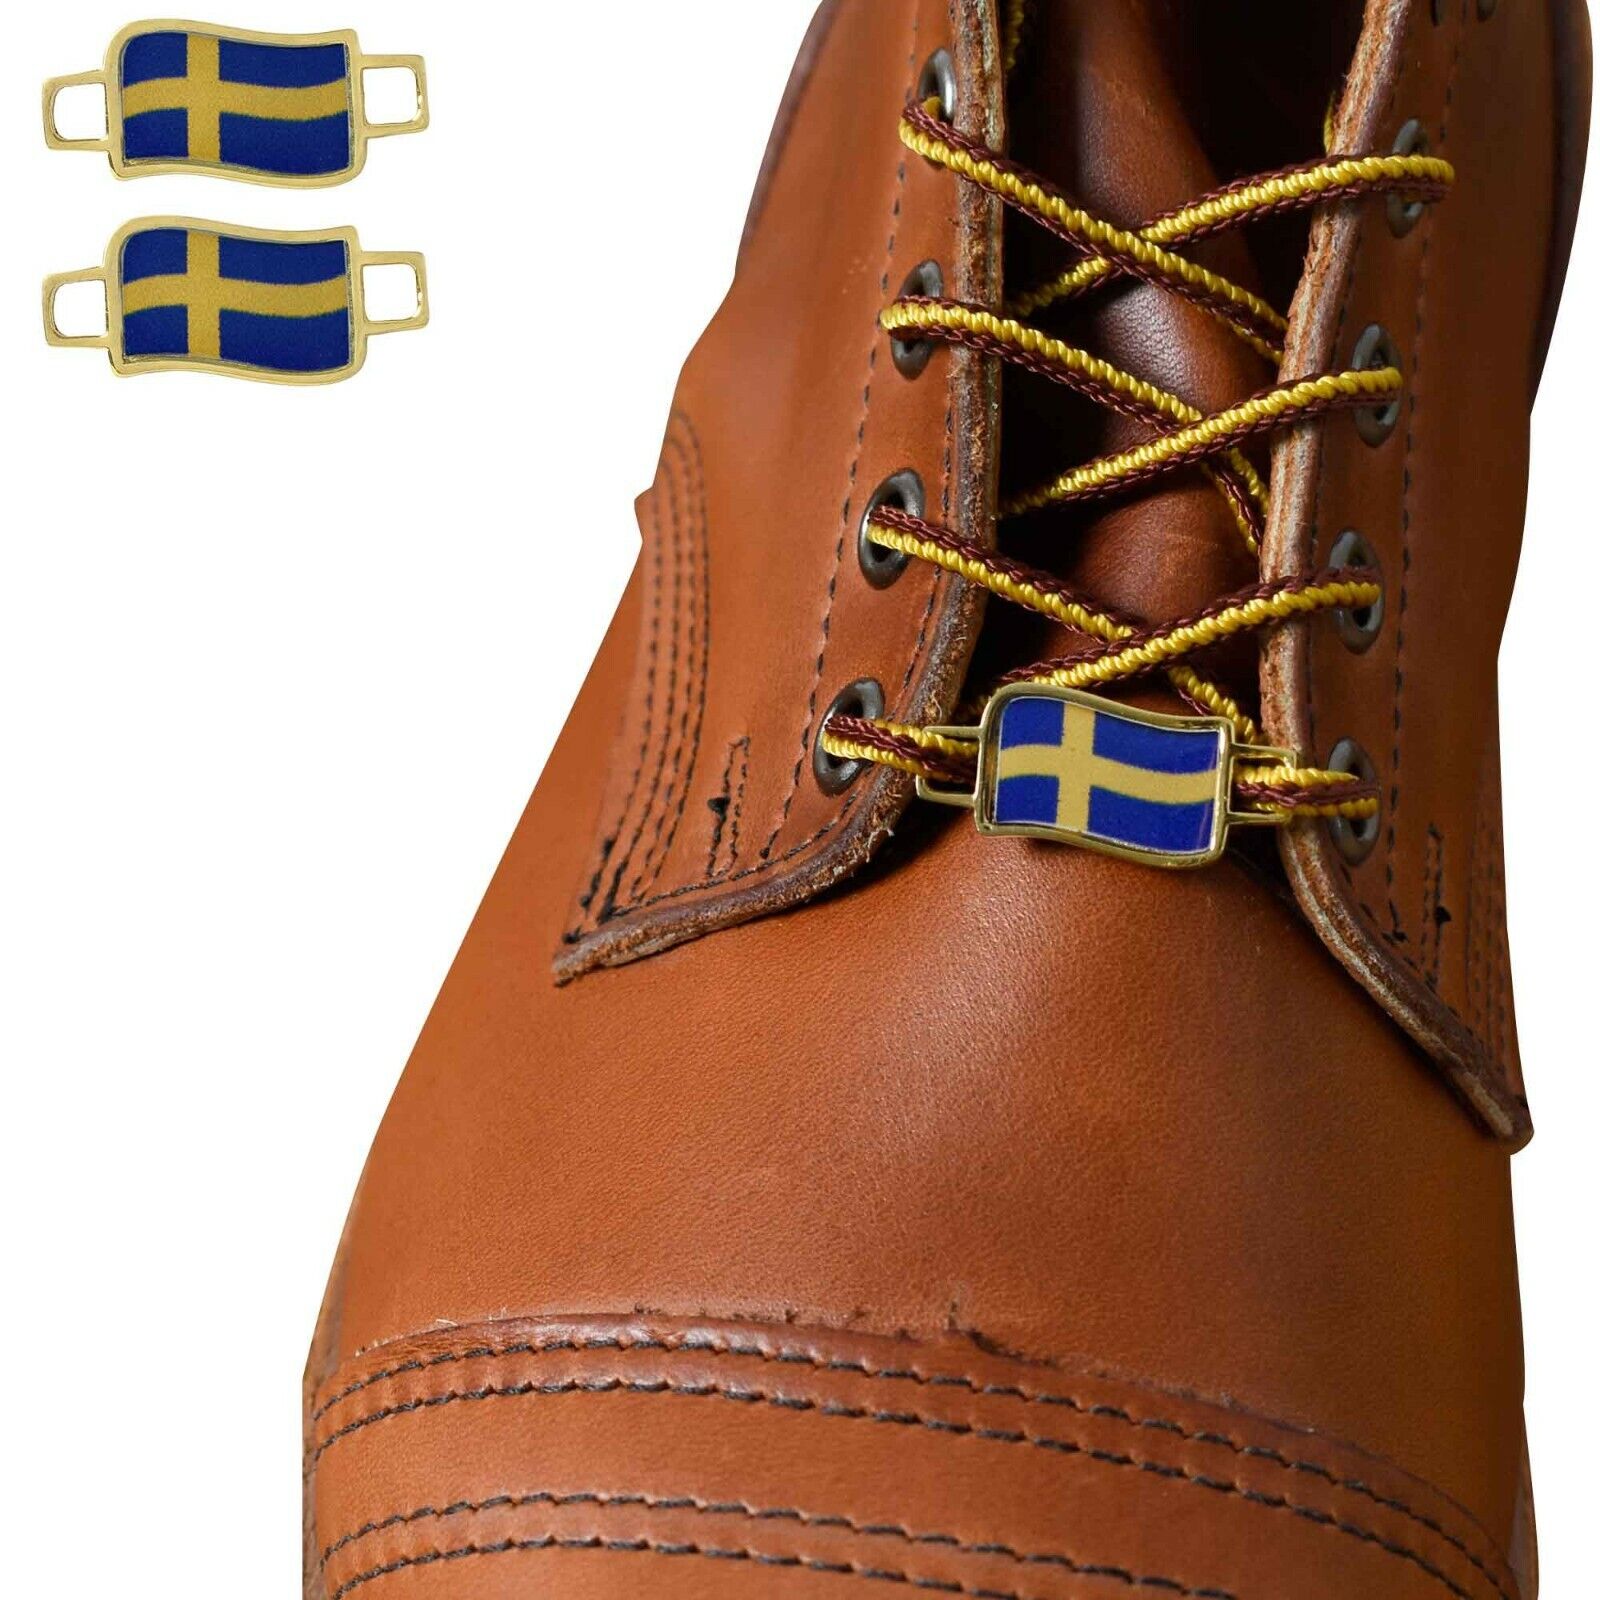 Sweden Flags Shoes Boot Shoelace Keeper Holder Charm BrooklynMaker